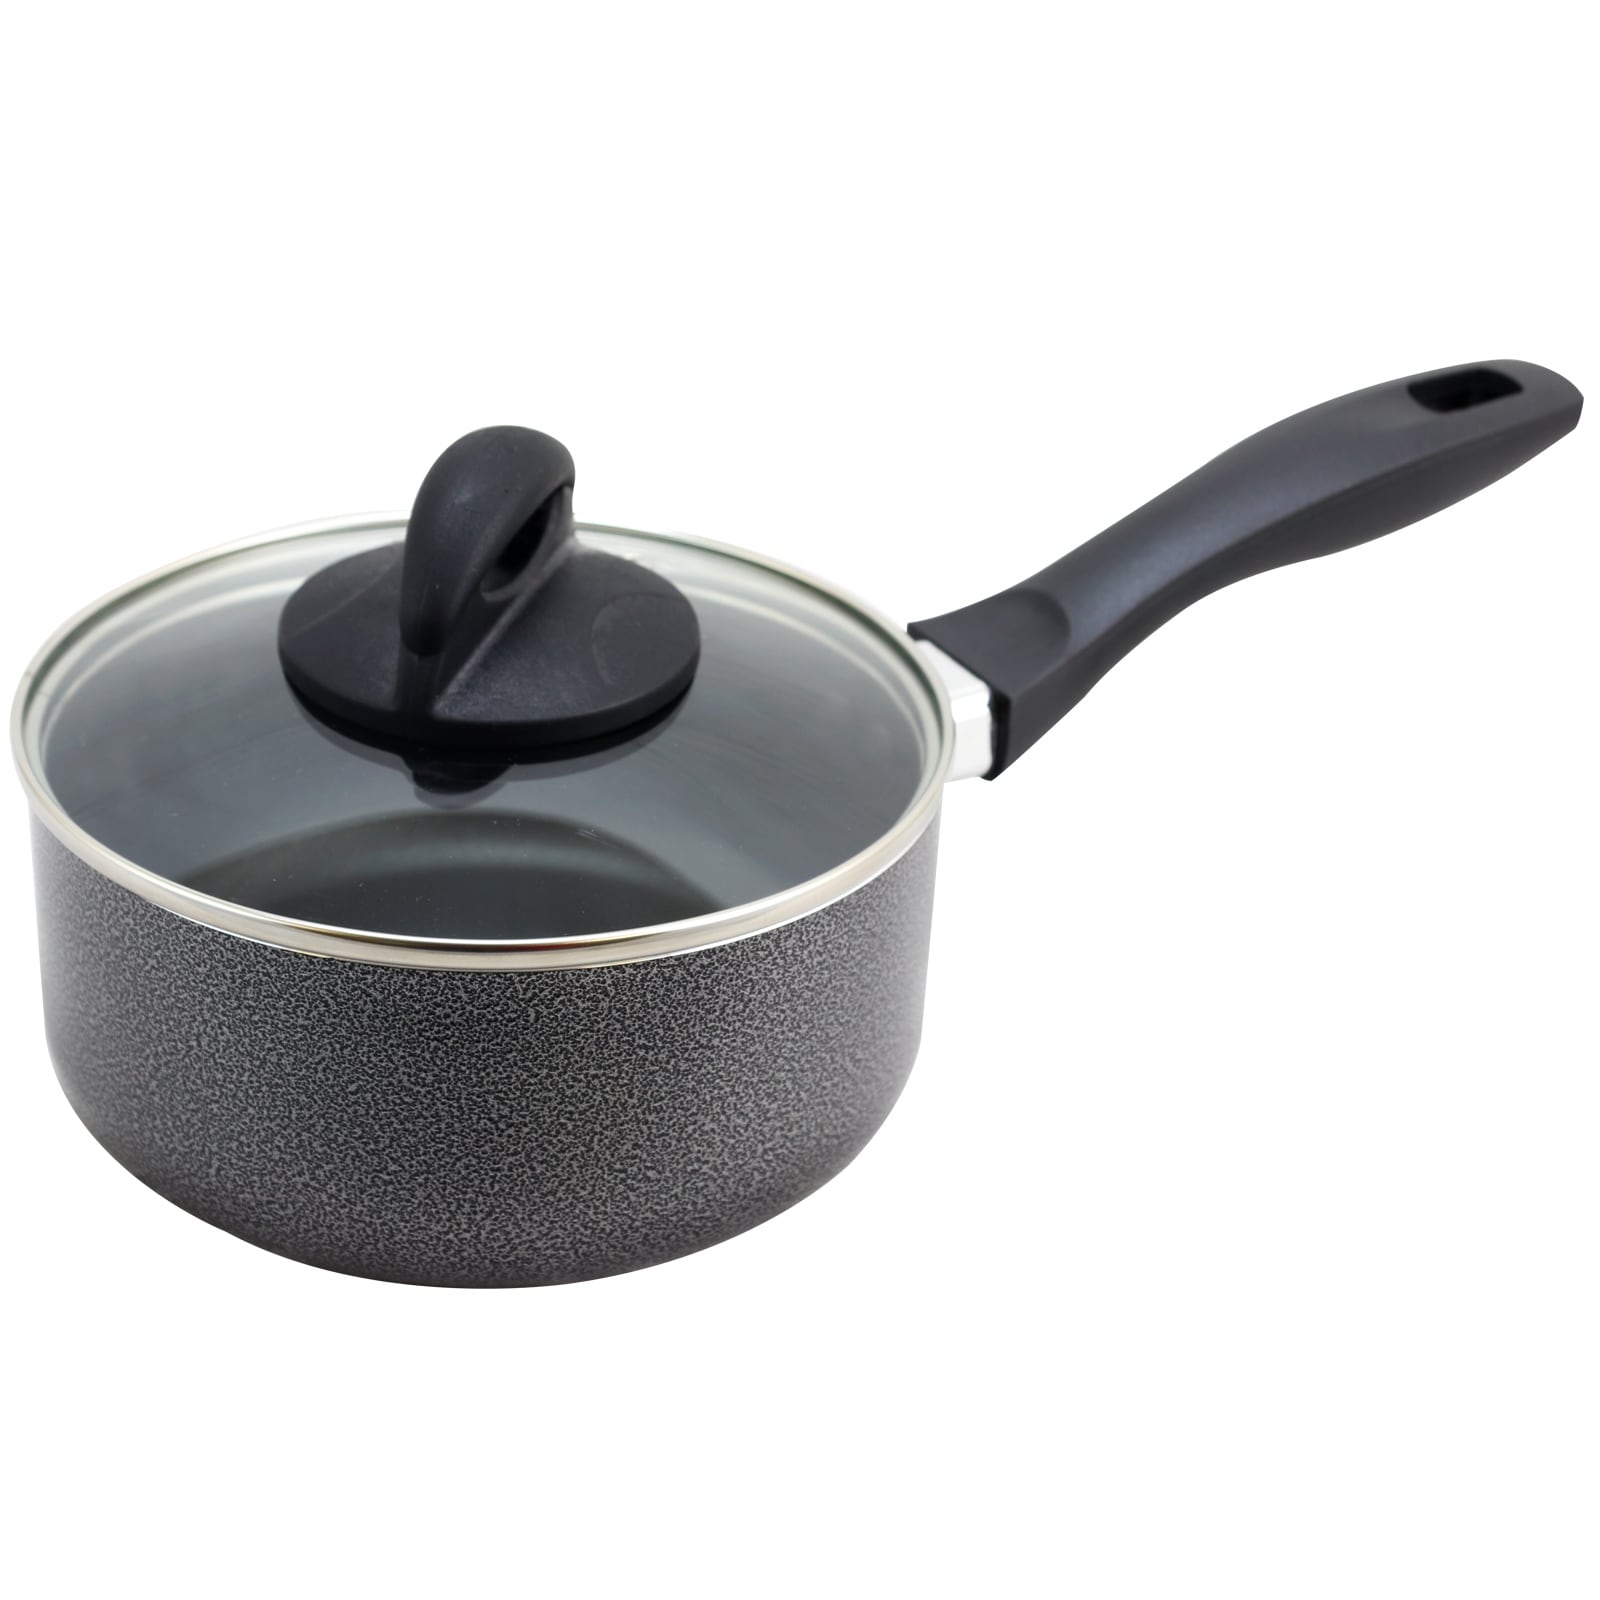 https://ak1.ostkcdn.com/images/products/is/images/direct/b34bf082927b07e360ffb51653e81dca9dfe04c4/Oster-Clairborne-1.5-Quart-Aluminum-Sauce-Pan-with-Lid-in-Charcoal-Grey.jpg